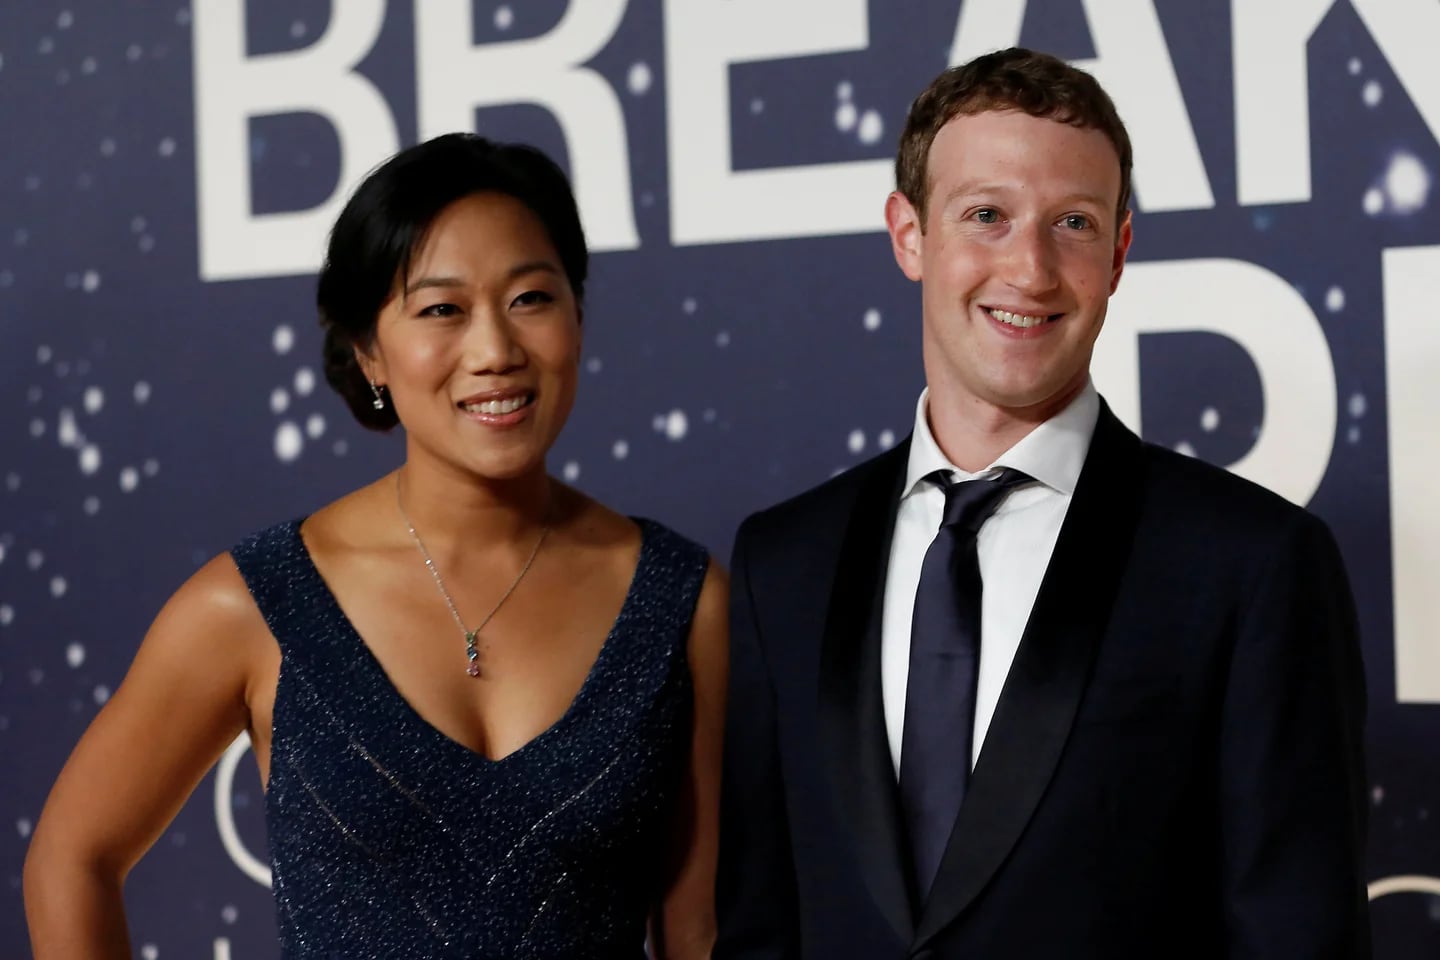 Who are the wives of the big techs: Bezos, Zuckerberg, Gates and more